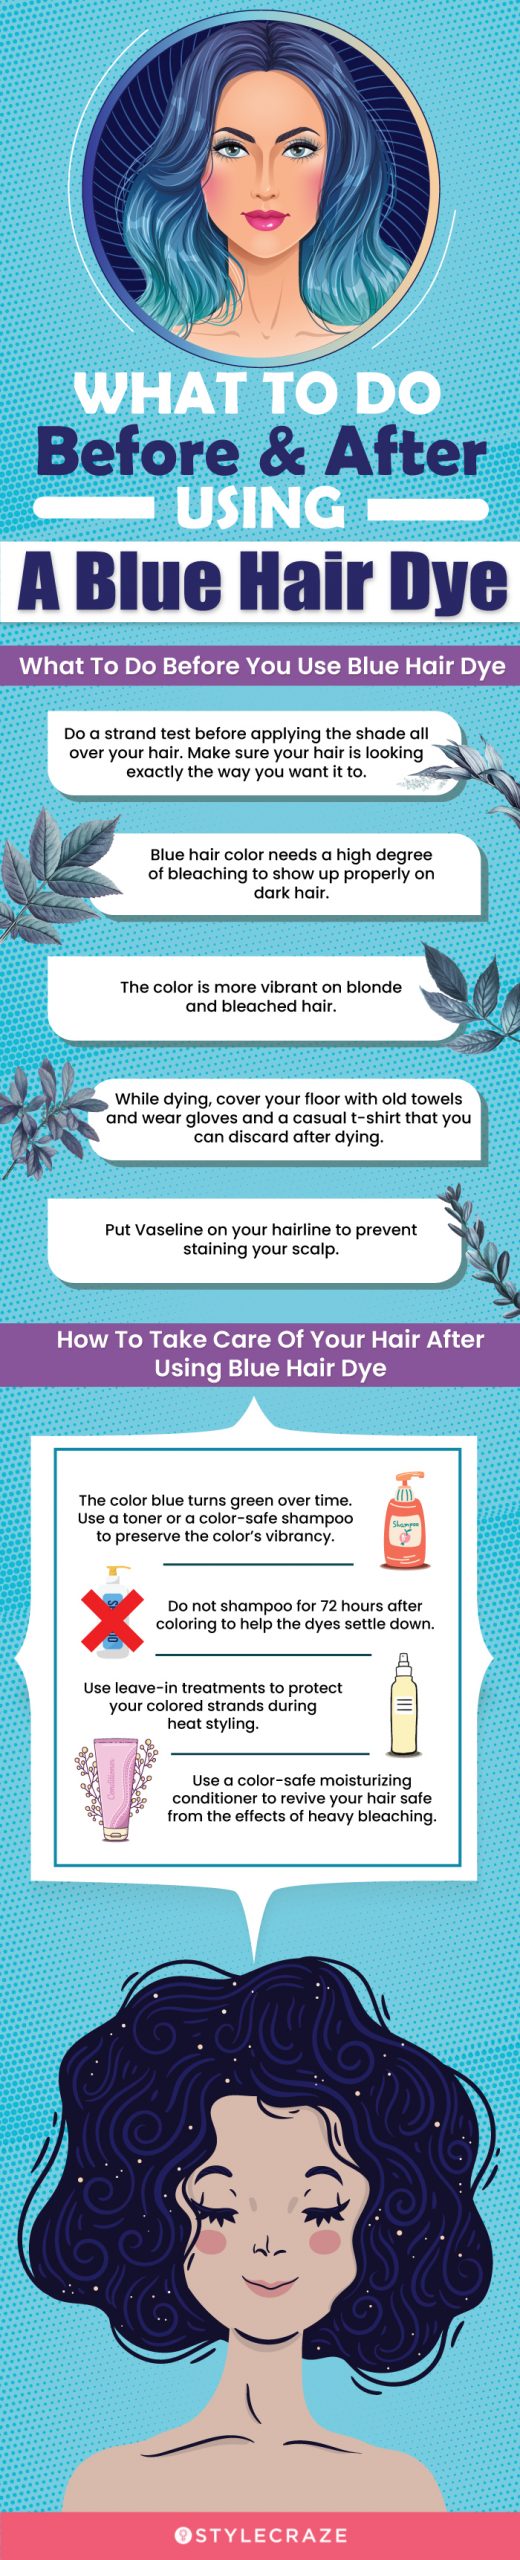 What To Do Before & After Using A Blue Hair Dye